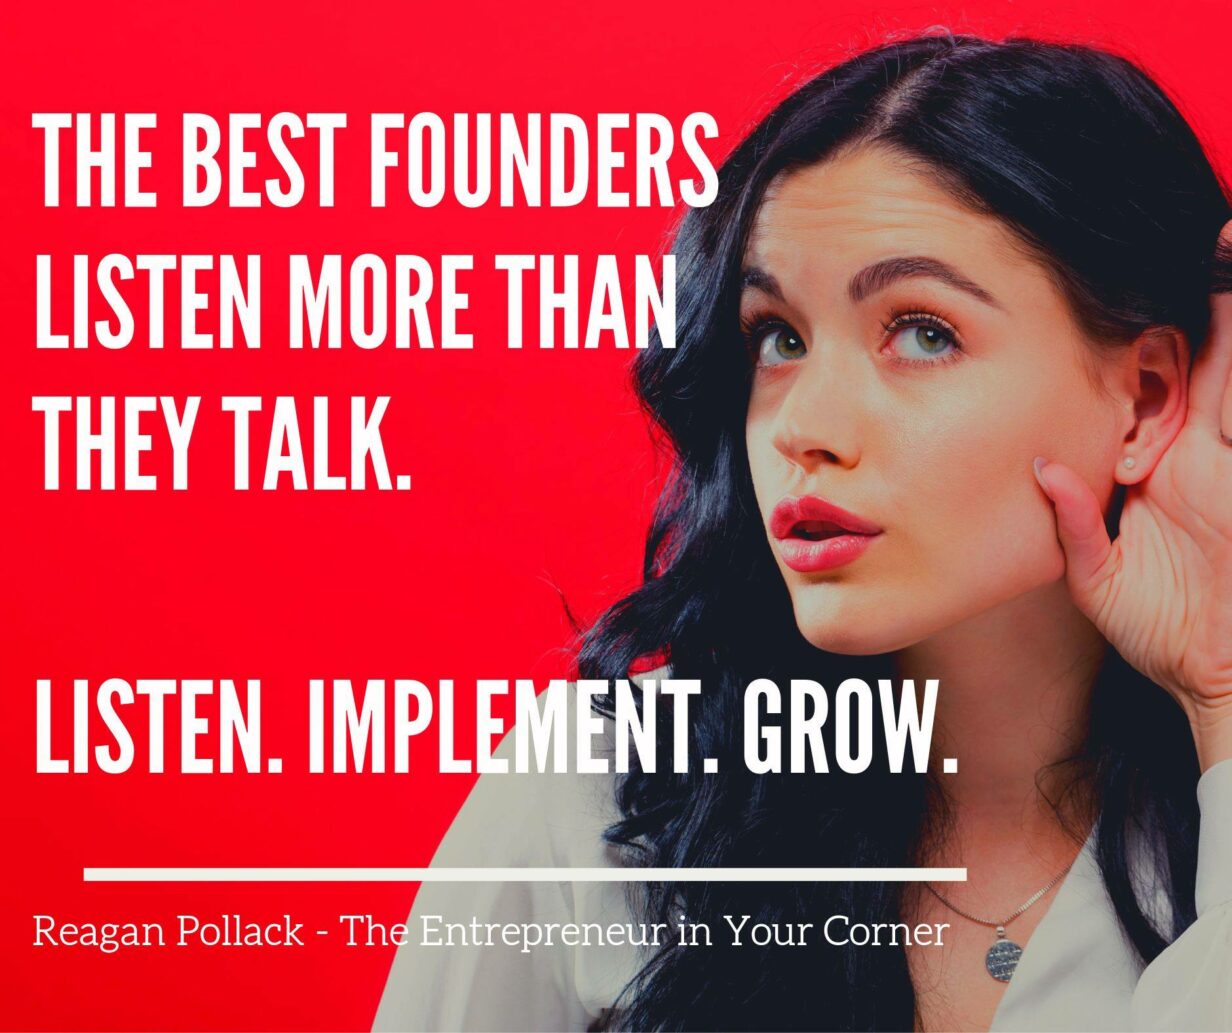 The Secret to Being a Great Founder - Reagan Pollack